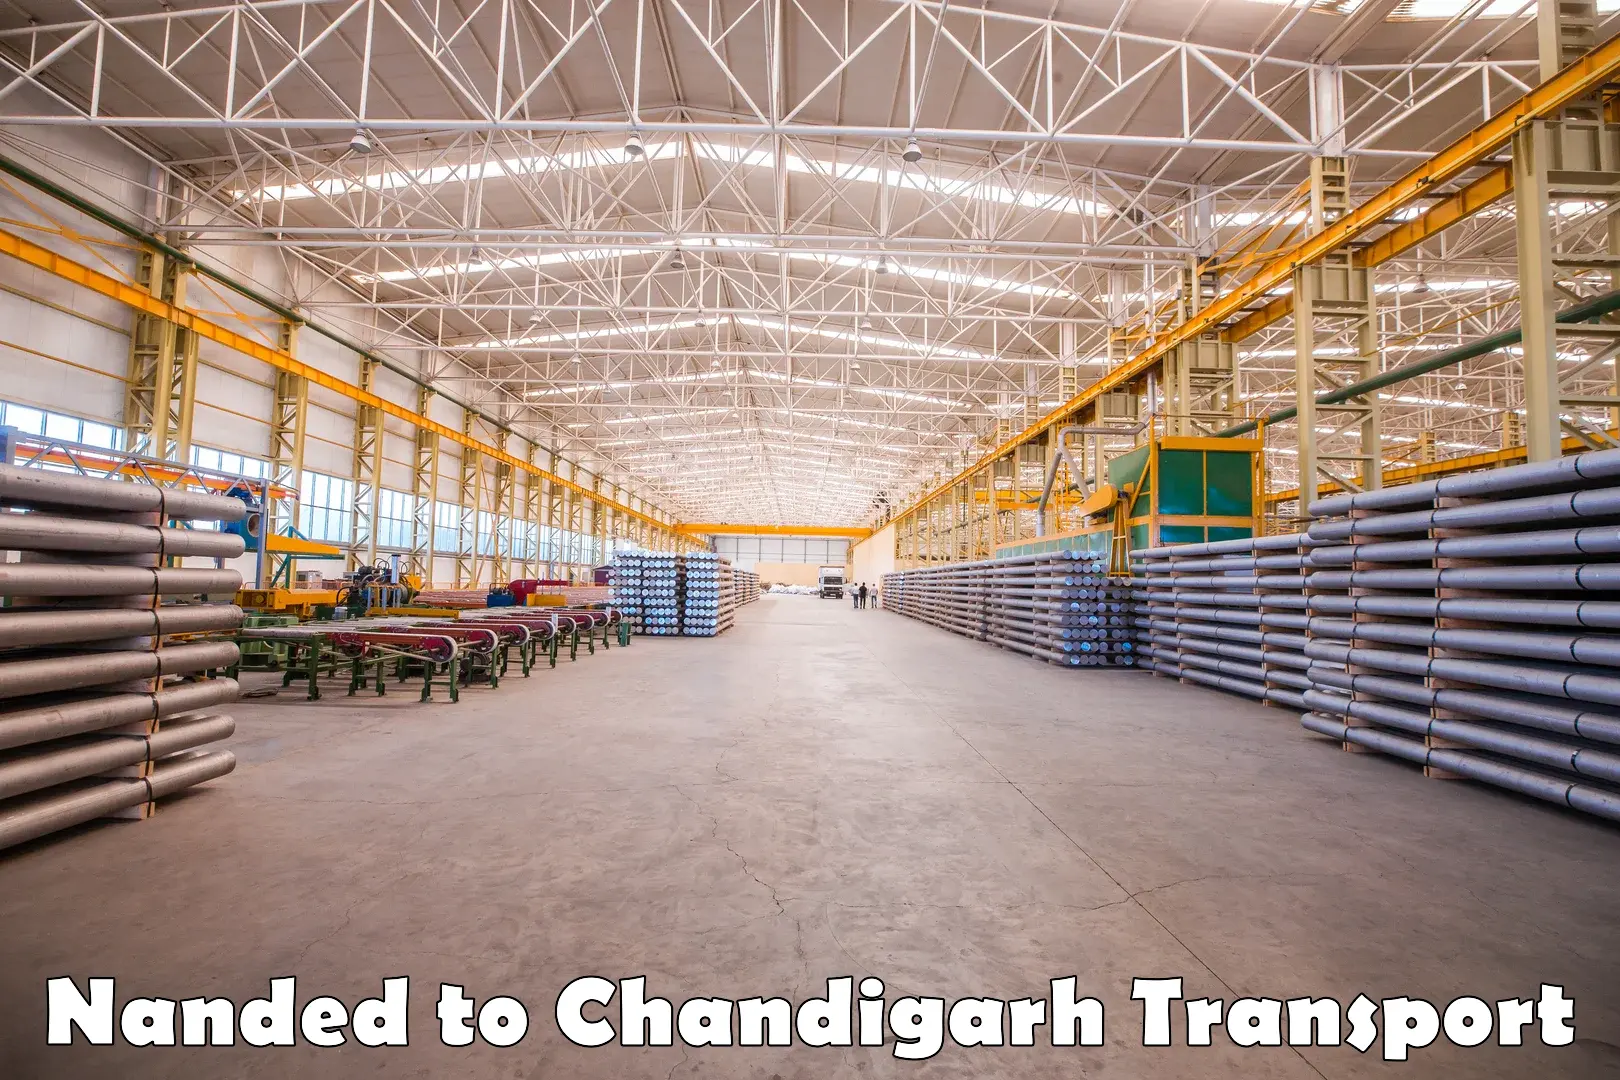 Transport in sharing Nanded to Chandigarh